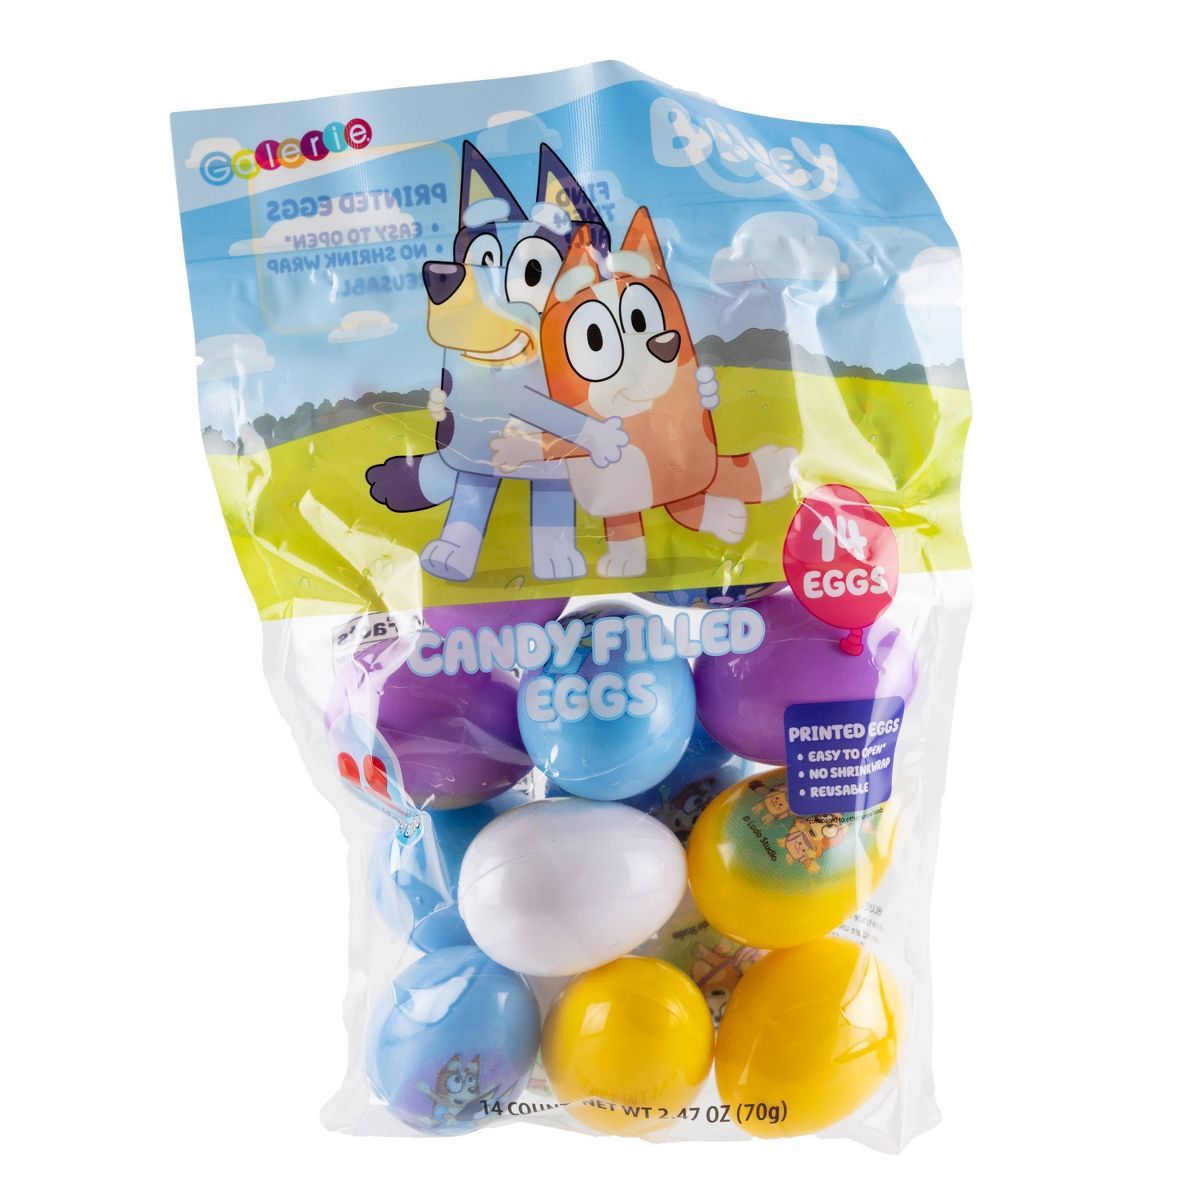 Bluey Printed Egg Bag with Candy - 2.47oz | Target